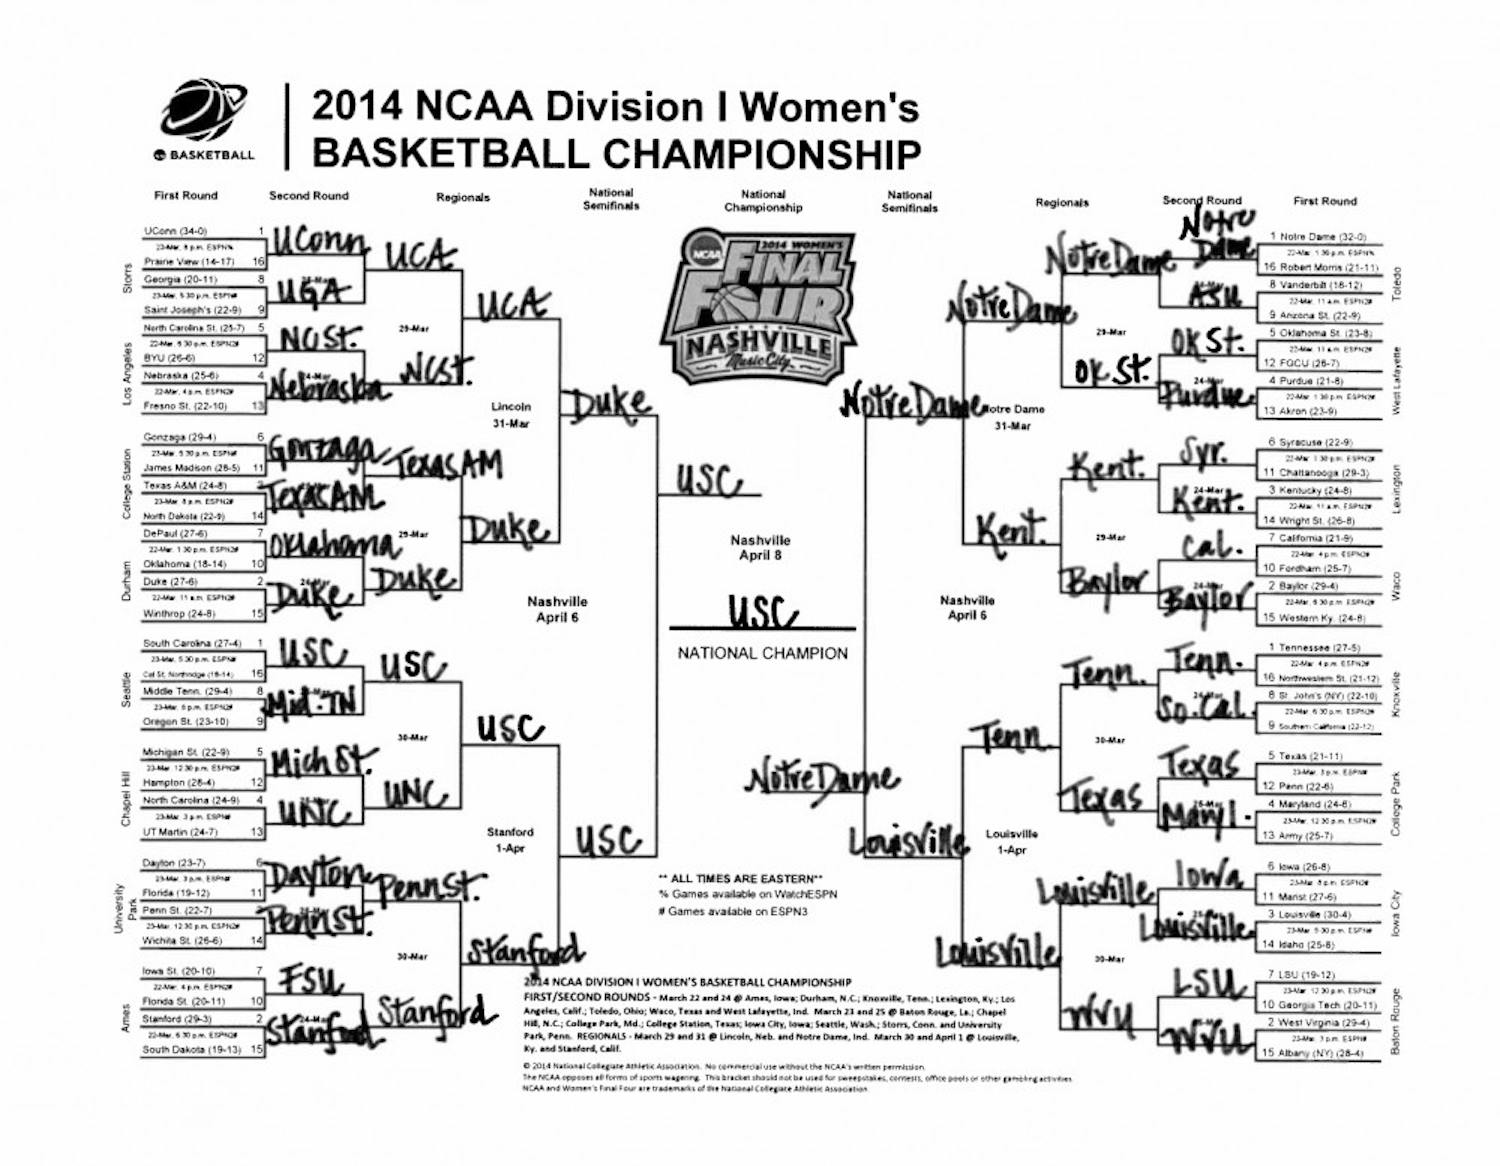 	Gov. Nikki Haley, 鶹С򽴫ý President Harris Pastides, Athletics Director Ray Tanner and others share their brackets for the 2014 NCAA women&#8217;s basketball tournament.